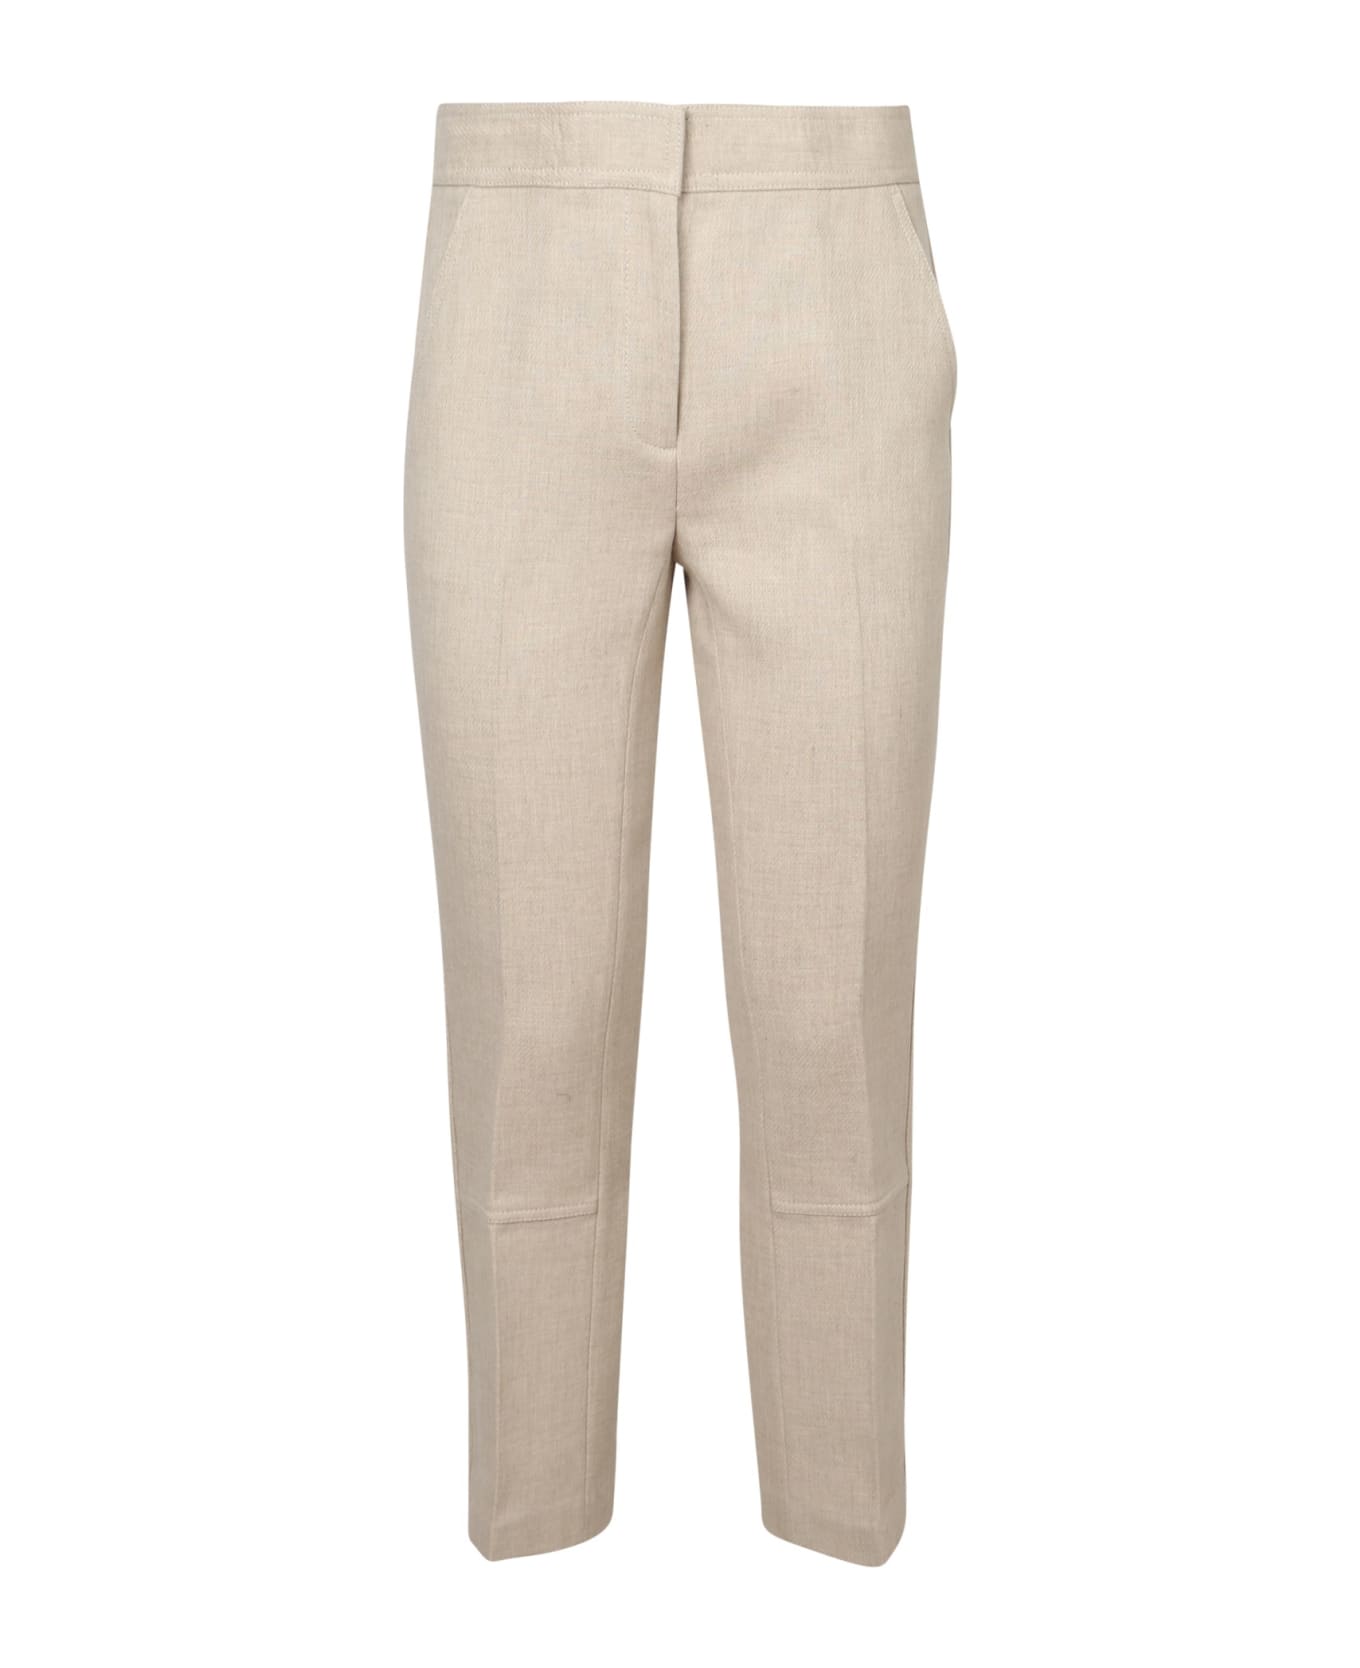 Tory Burch Phoebe Twill Trousers Ivory Trousers - White